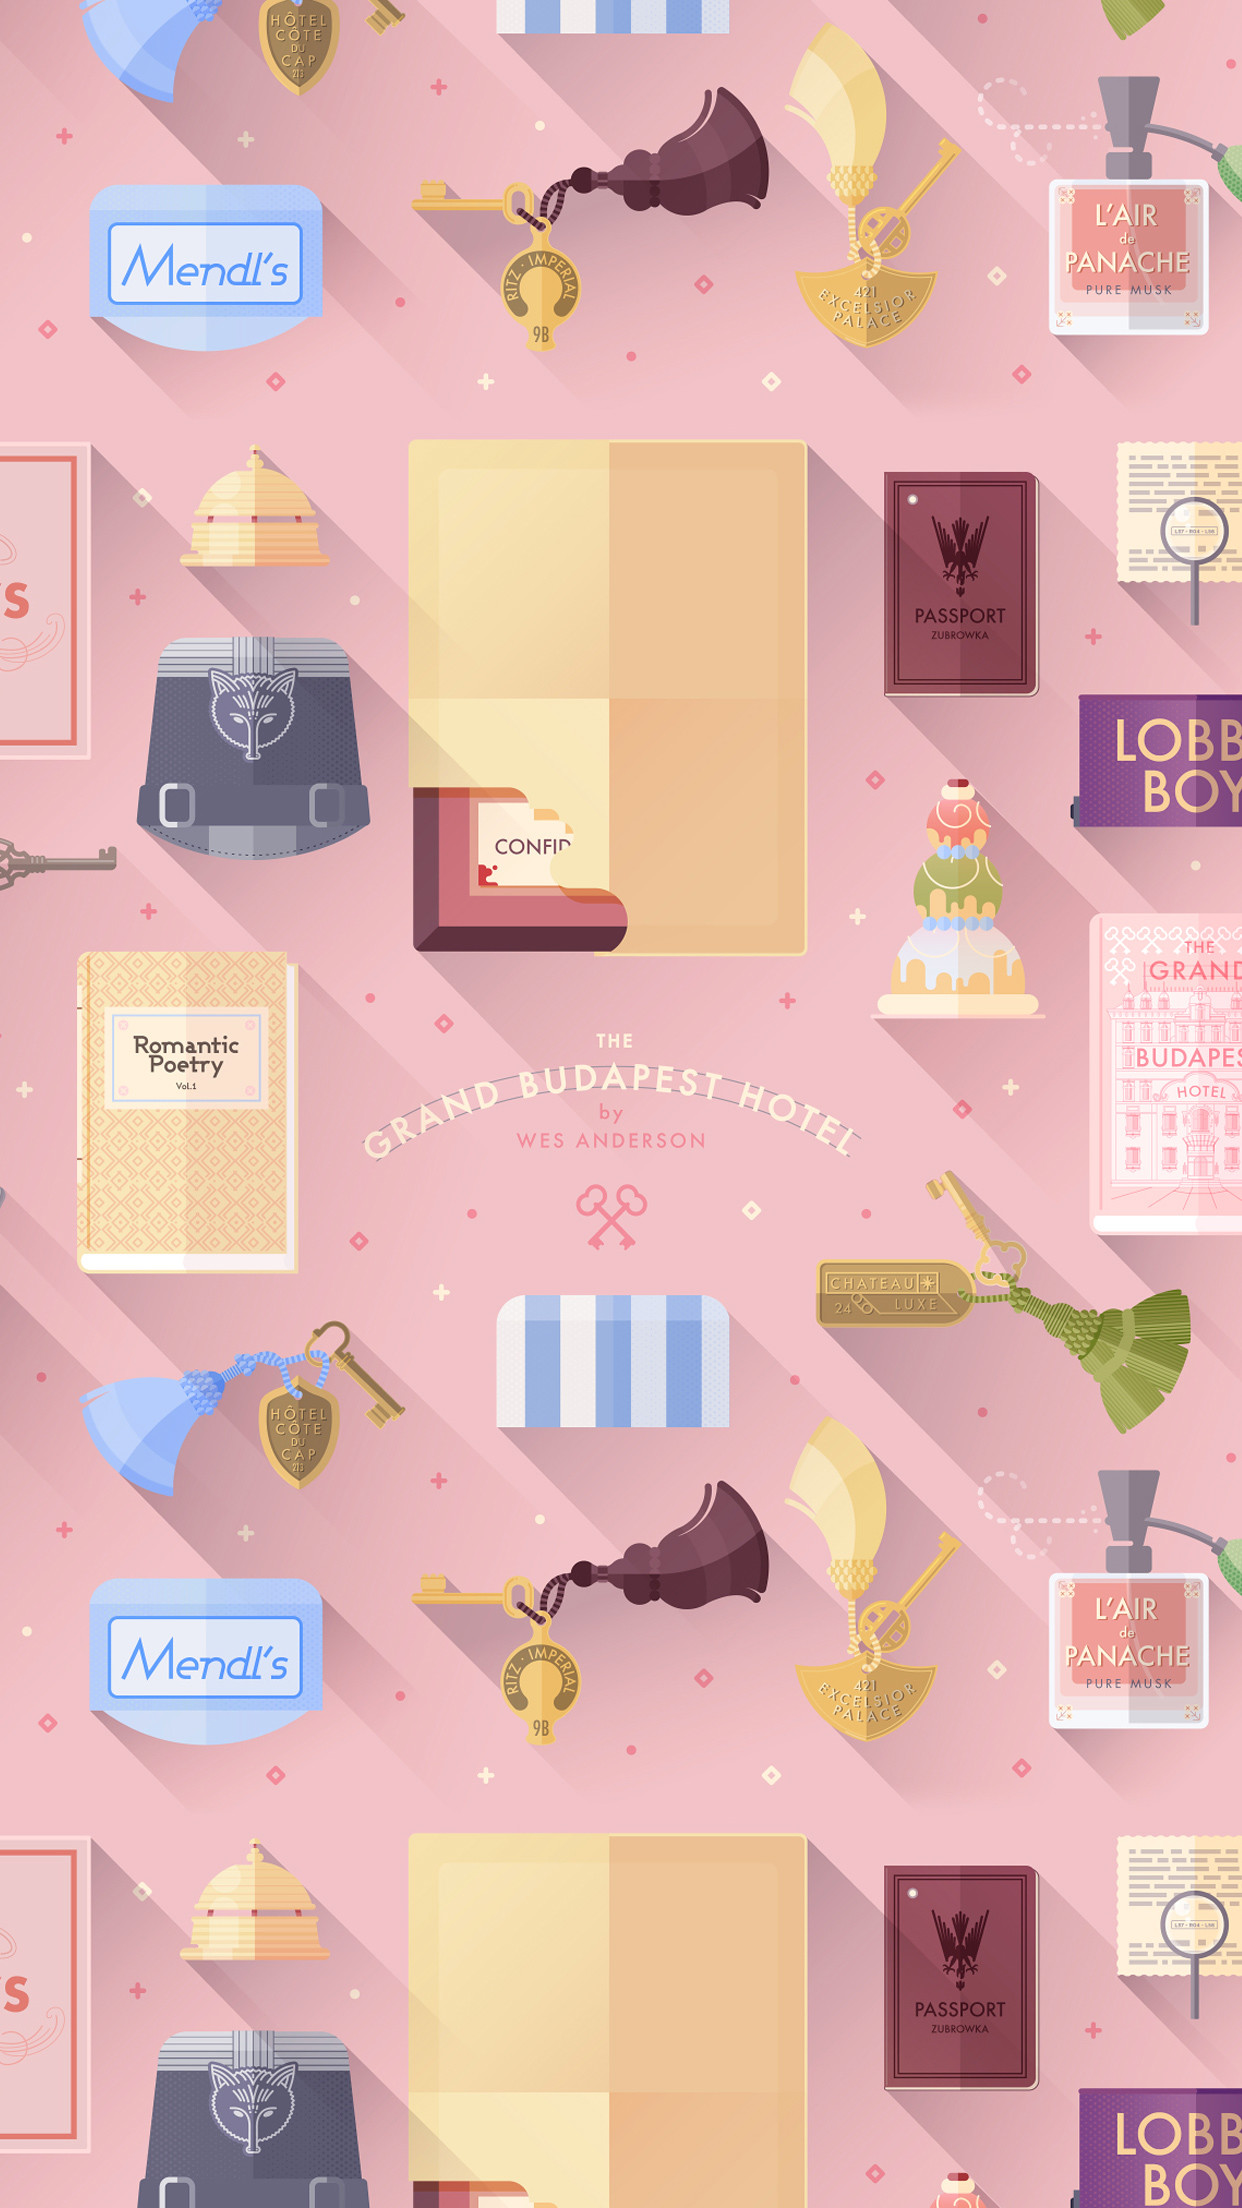 A little tribute to The Grand Budapest Hotel, Wes Anderson movie, on a flat design version. – vector icons icon with shadows